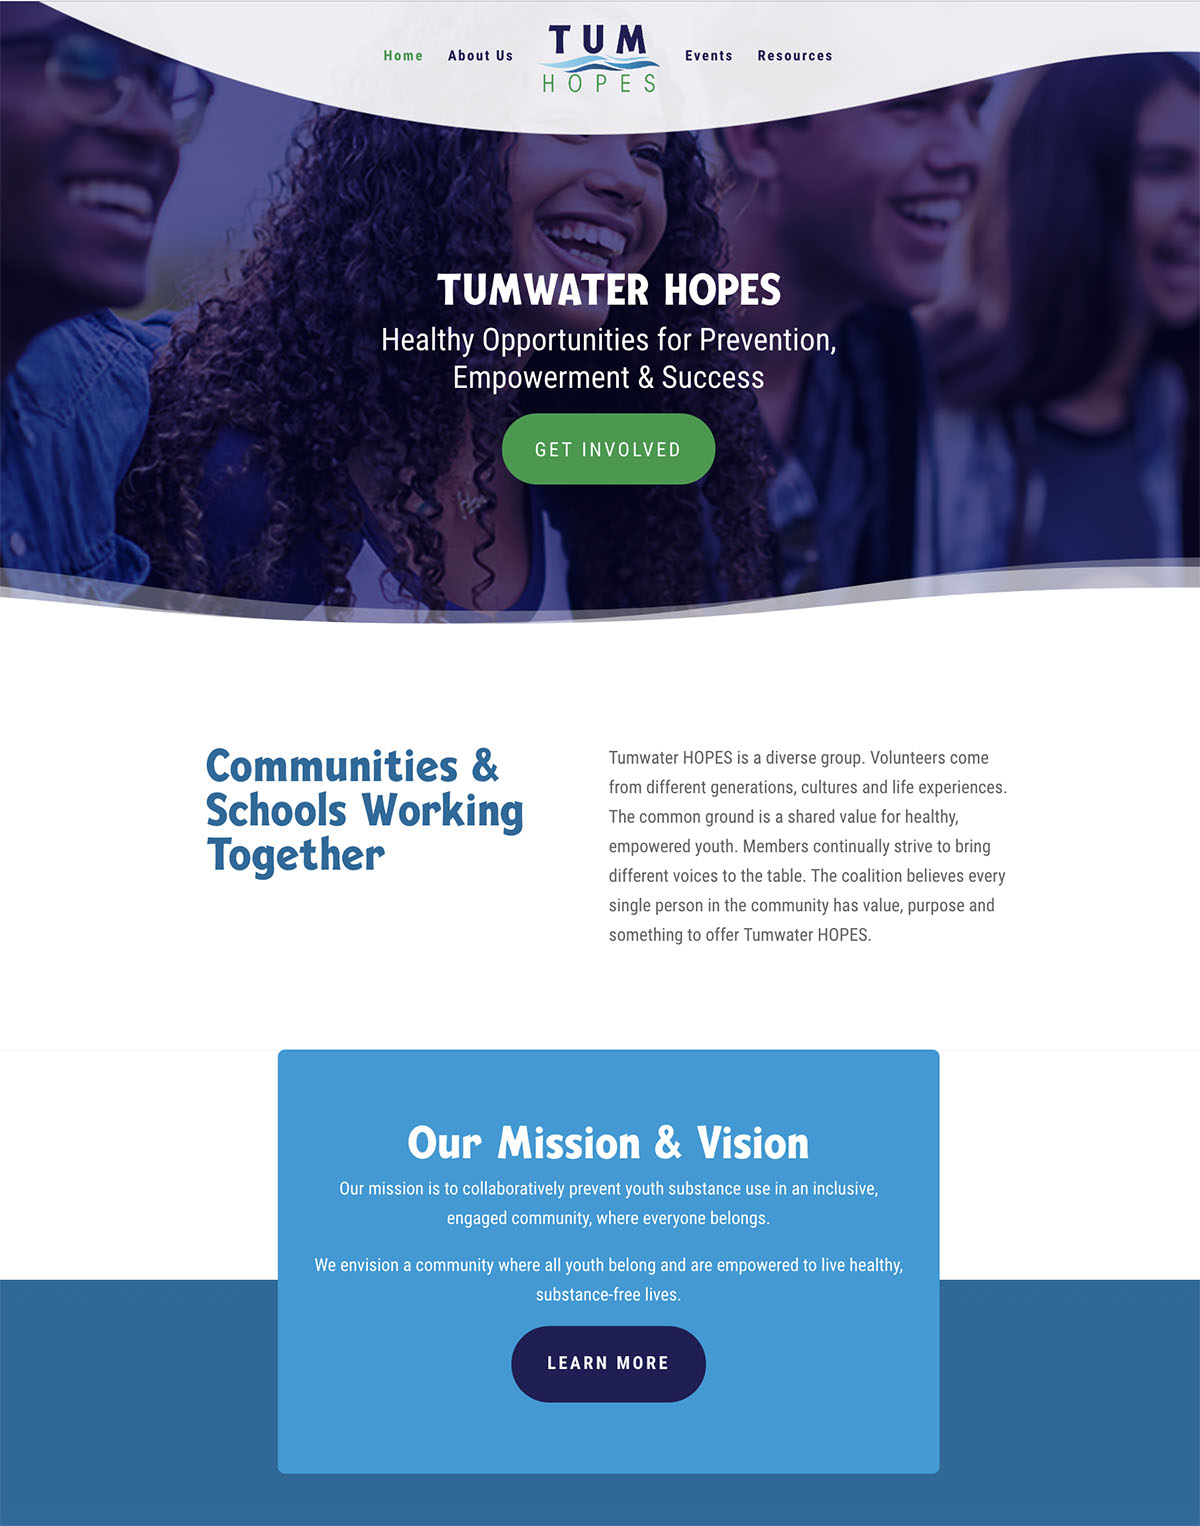 Tumwater HOPES Home page